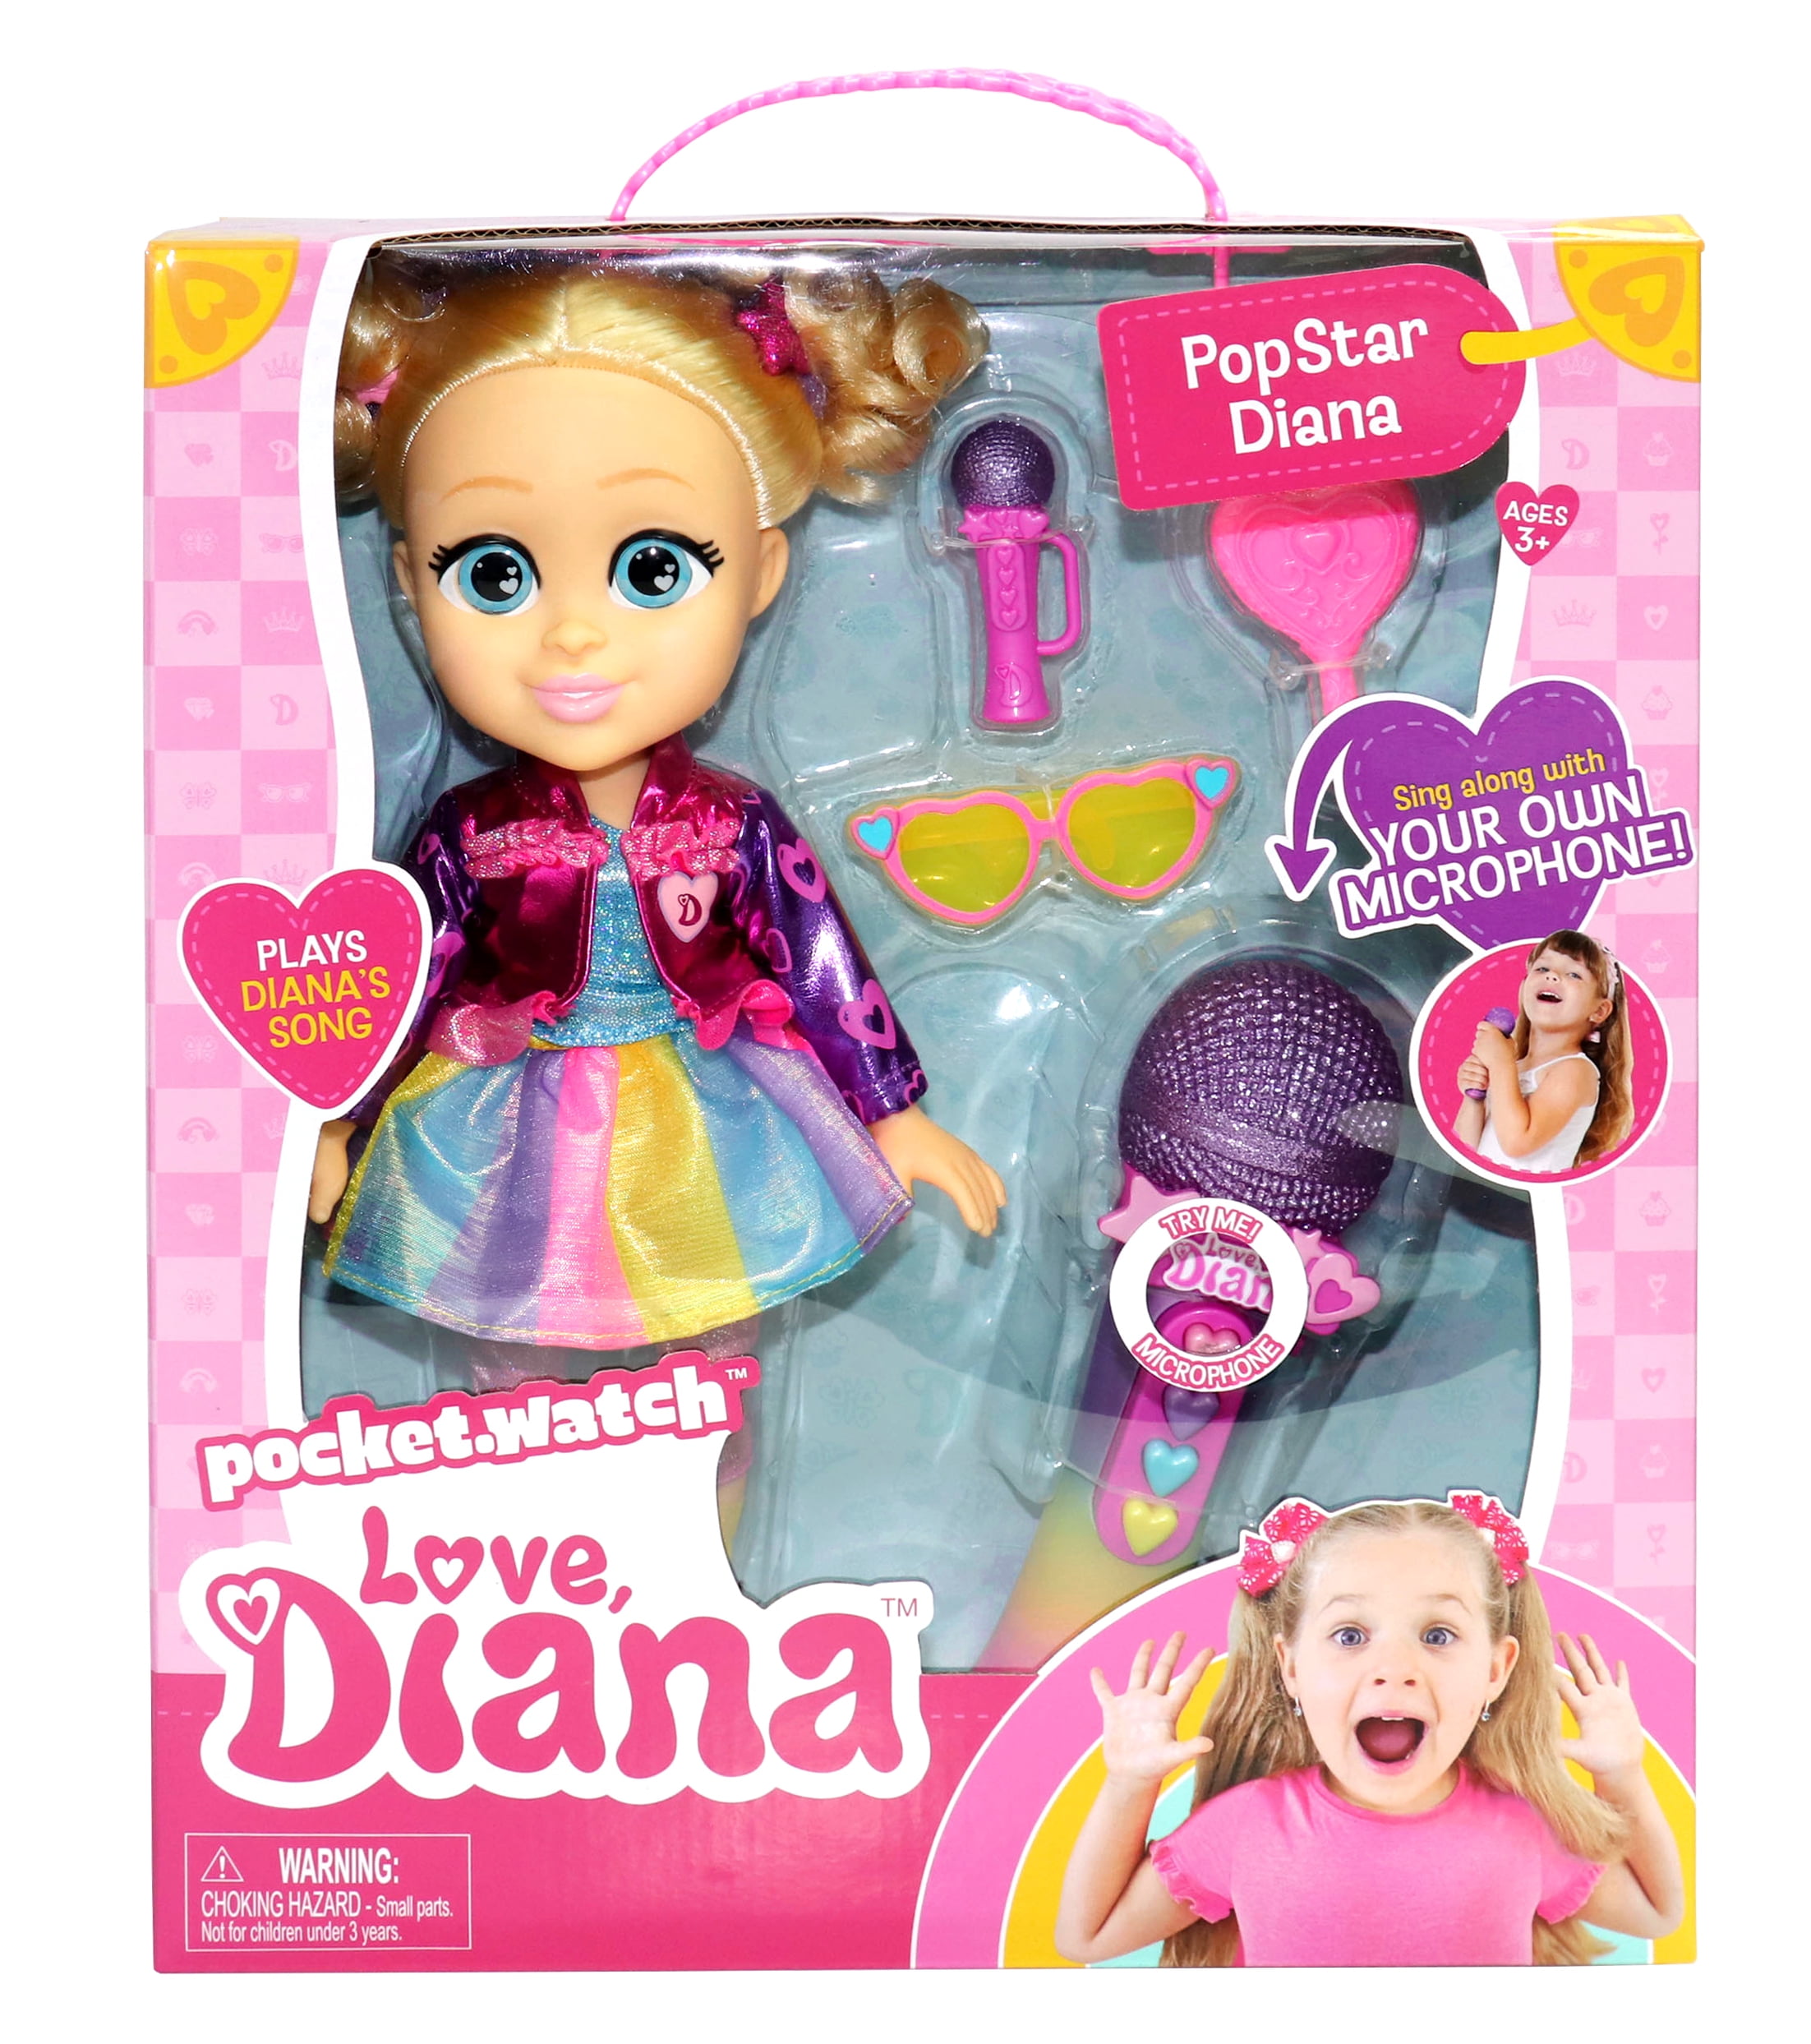 Pocket.Watch Love Diana Mini Doll Assorted Christmas Gift Toys Kid's 2020 New 